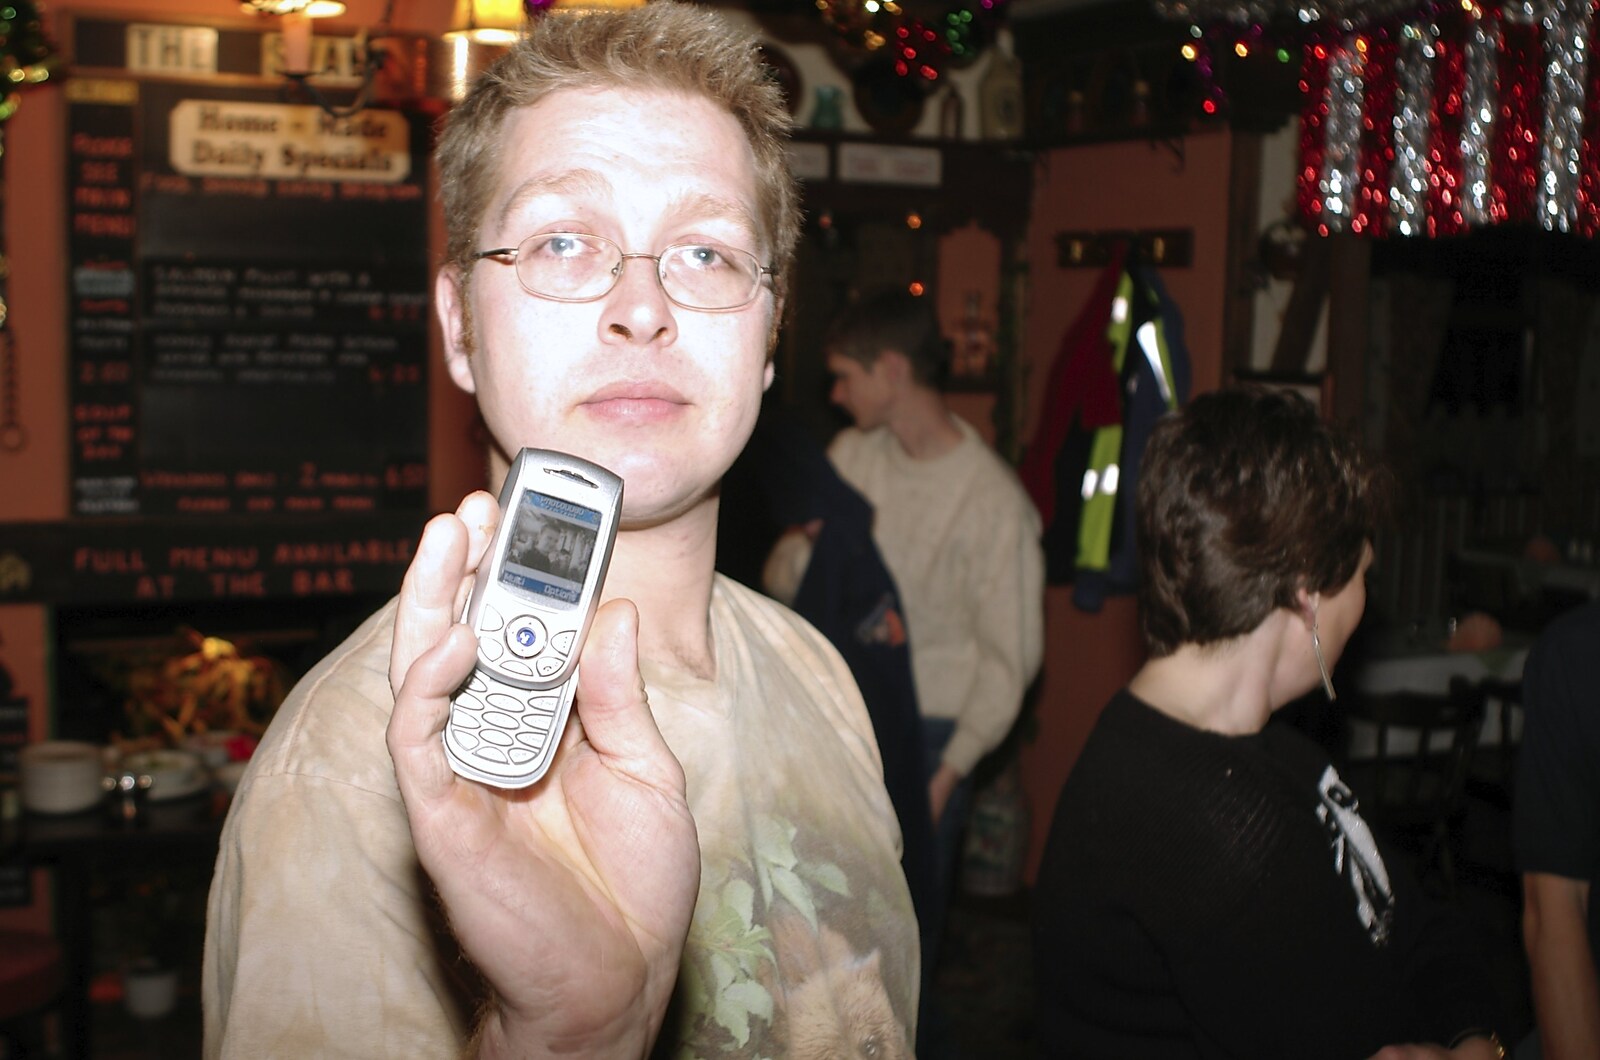 New Year's Eve at The Swan Inn, Brome, Suffolk - 31st December 2004: Marc shows off a mobile phone picture of Nosher